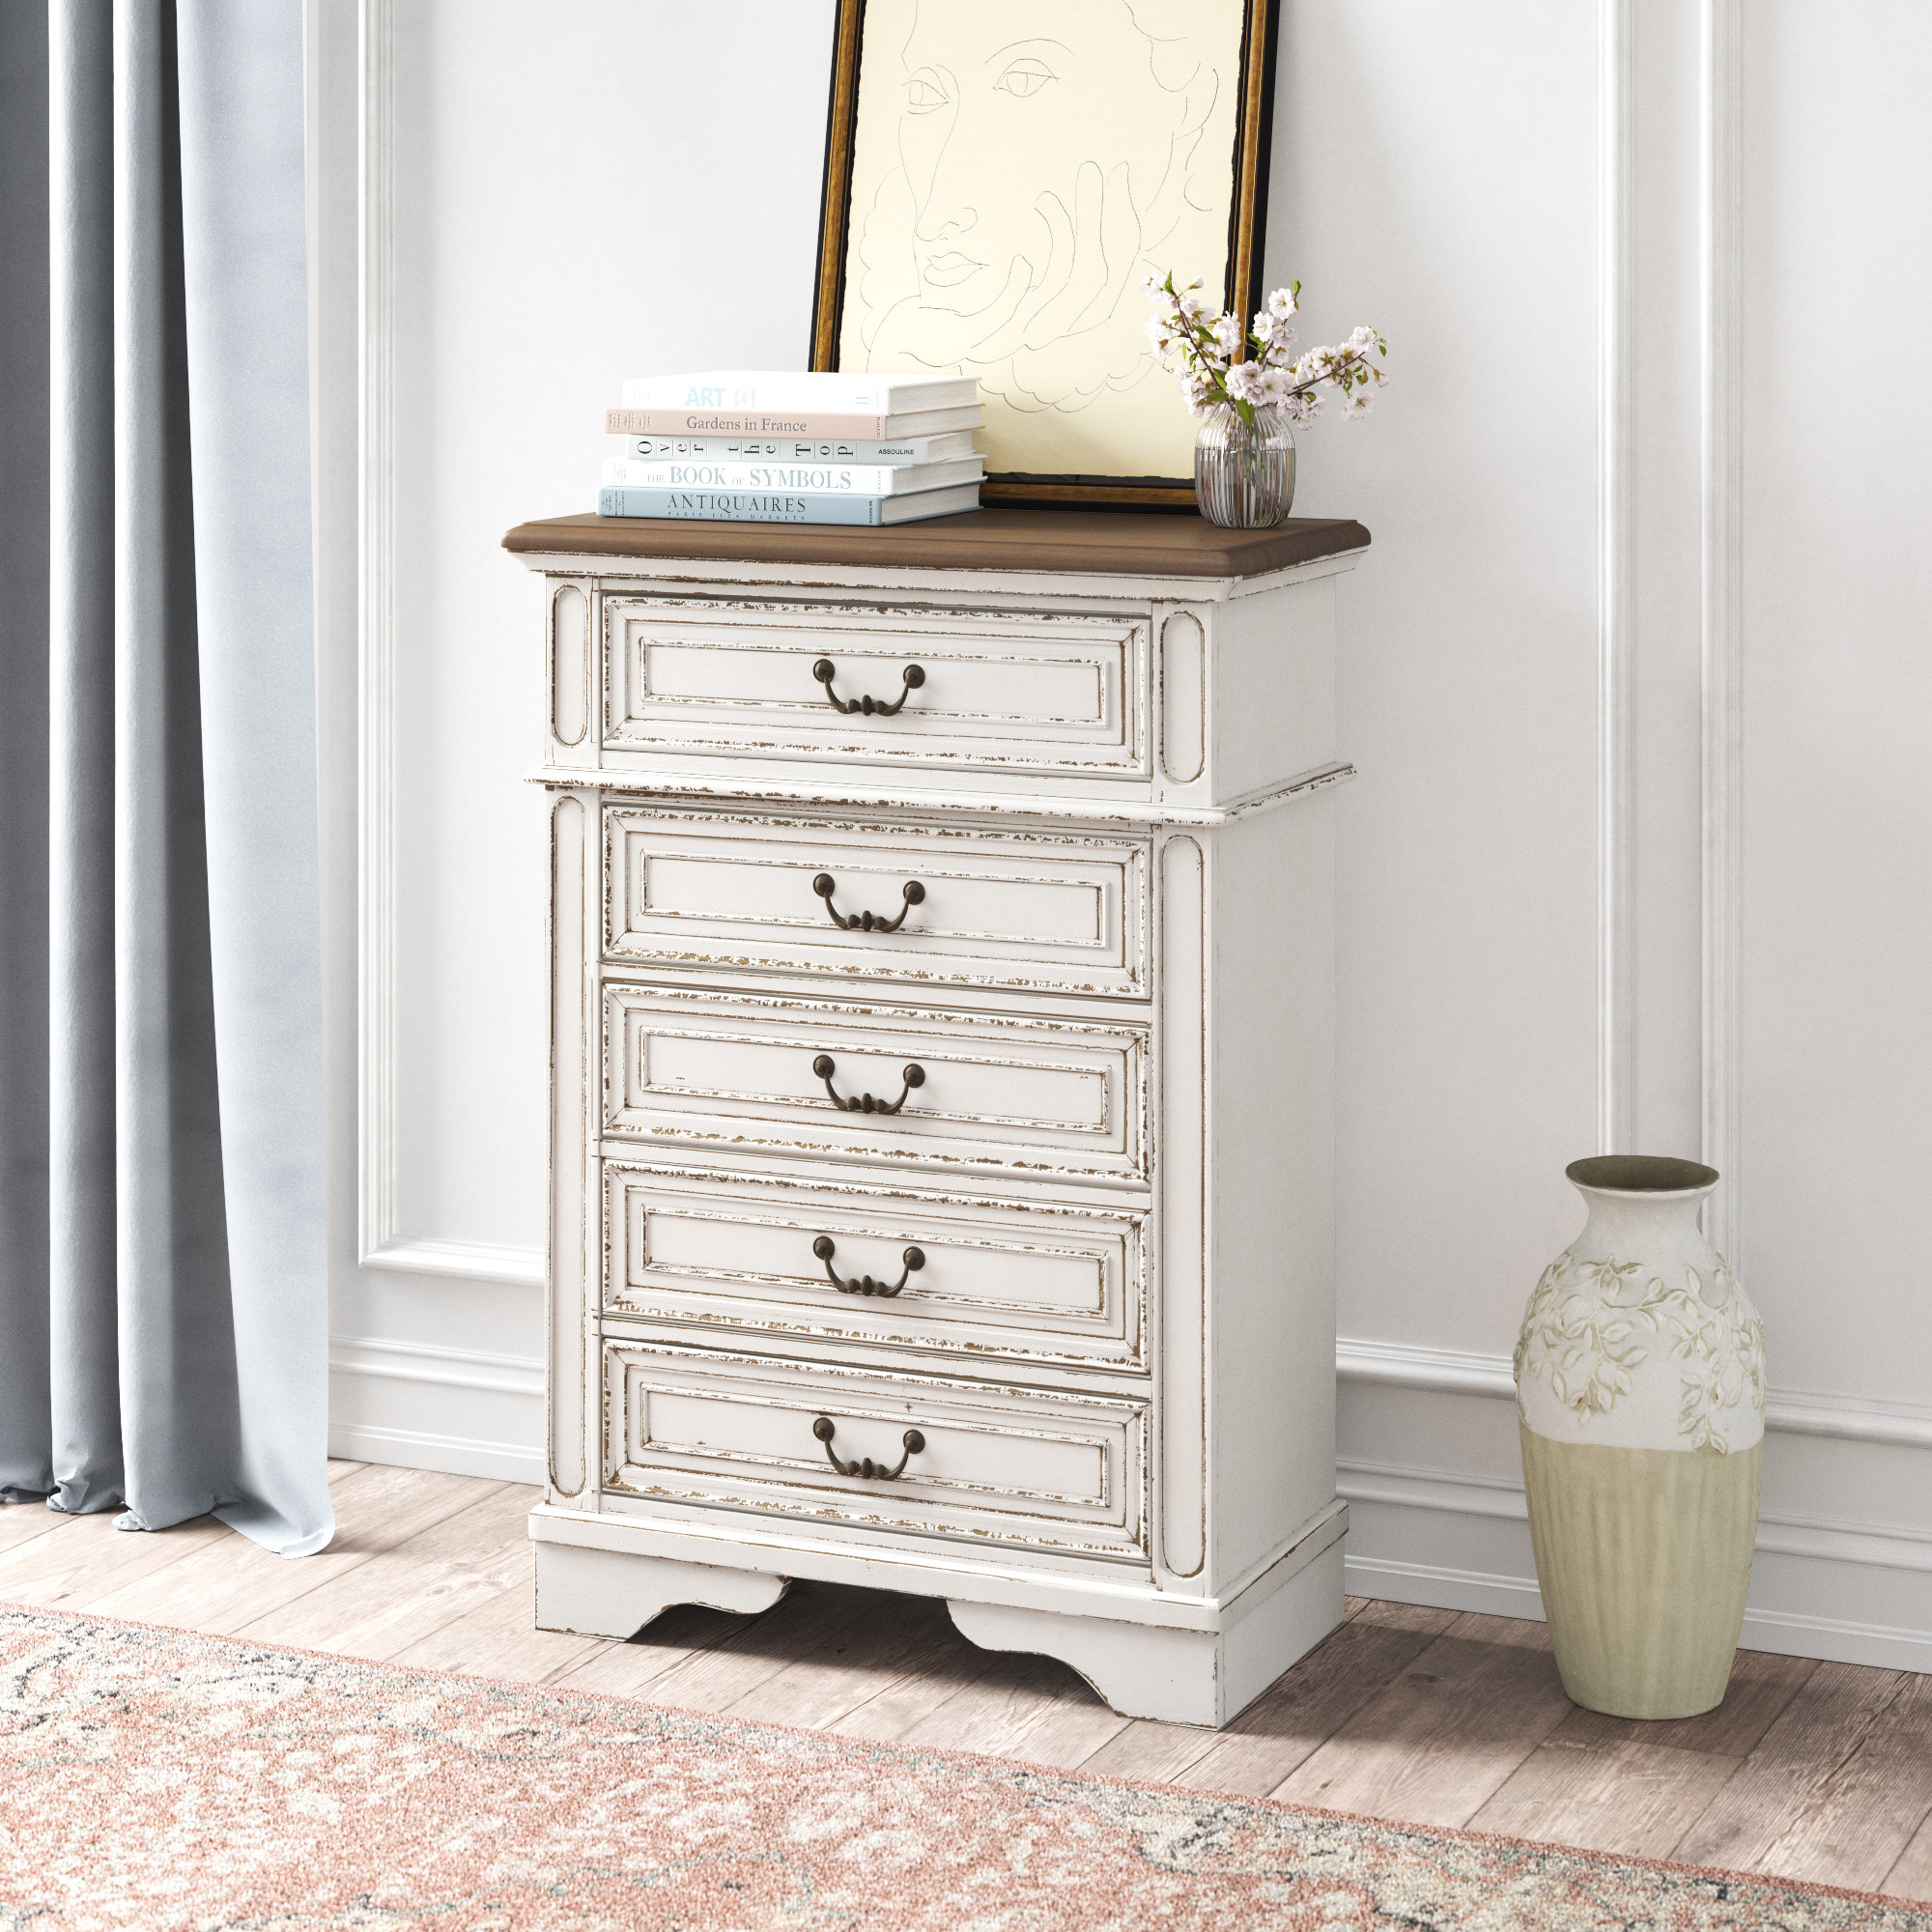 5 Drawer Dresser White Chest of Drawers Bedroom Nightstand Wood Frame Antique 